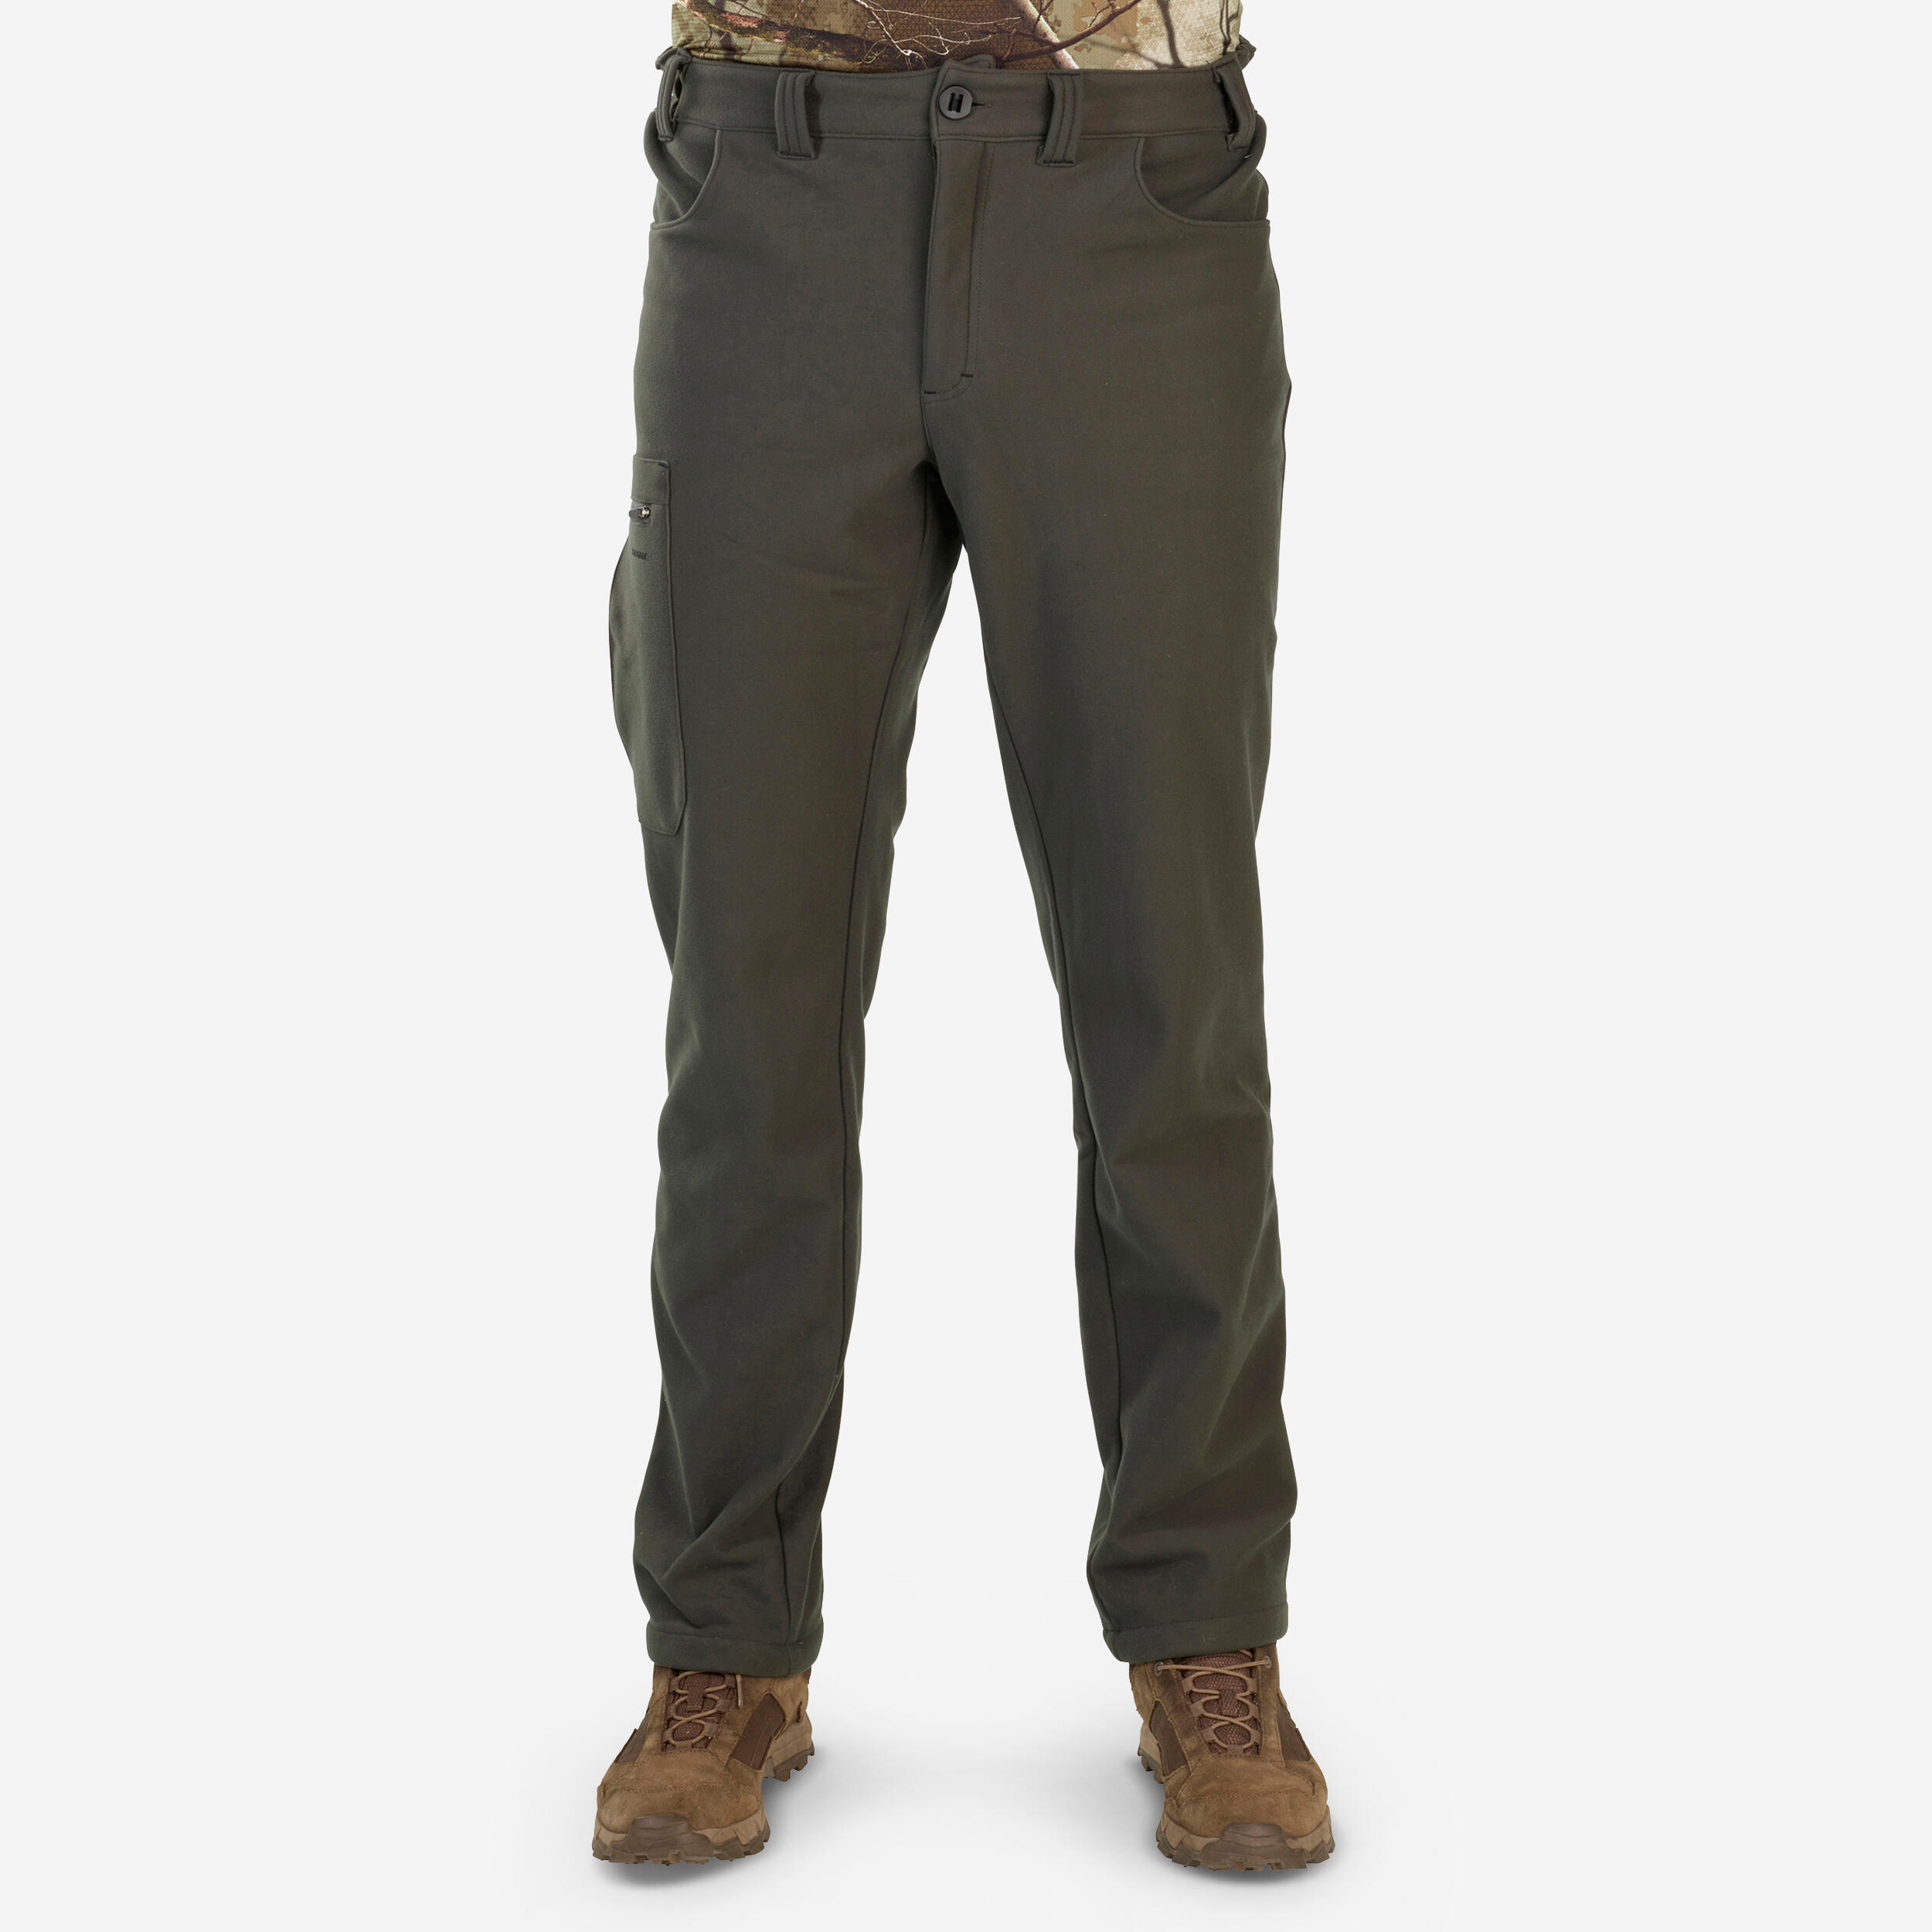 QUECHUA Forclaz 50 Men's Hiking Fleece Trousers By Decathlon - Buy QUECHUA  Forclaz 50 Men's Hiking Fleece Trousers By Decathlon Online at Best Prices  in India on Snapdeal